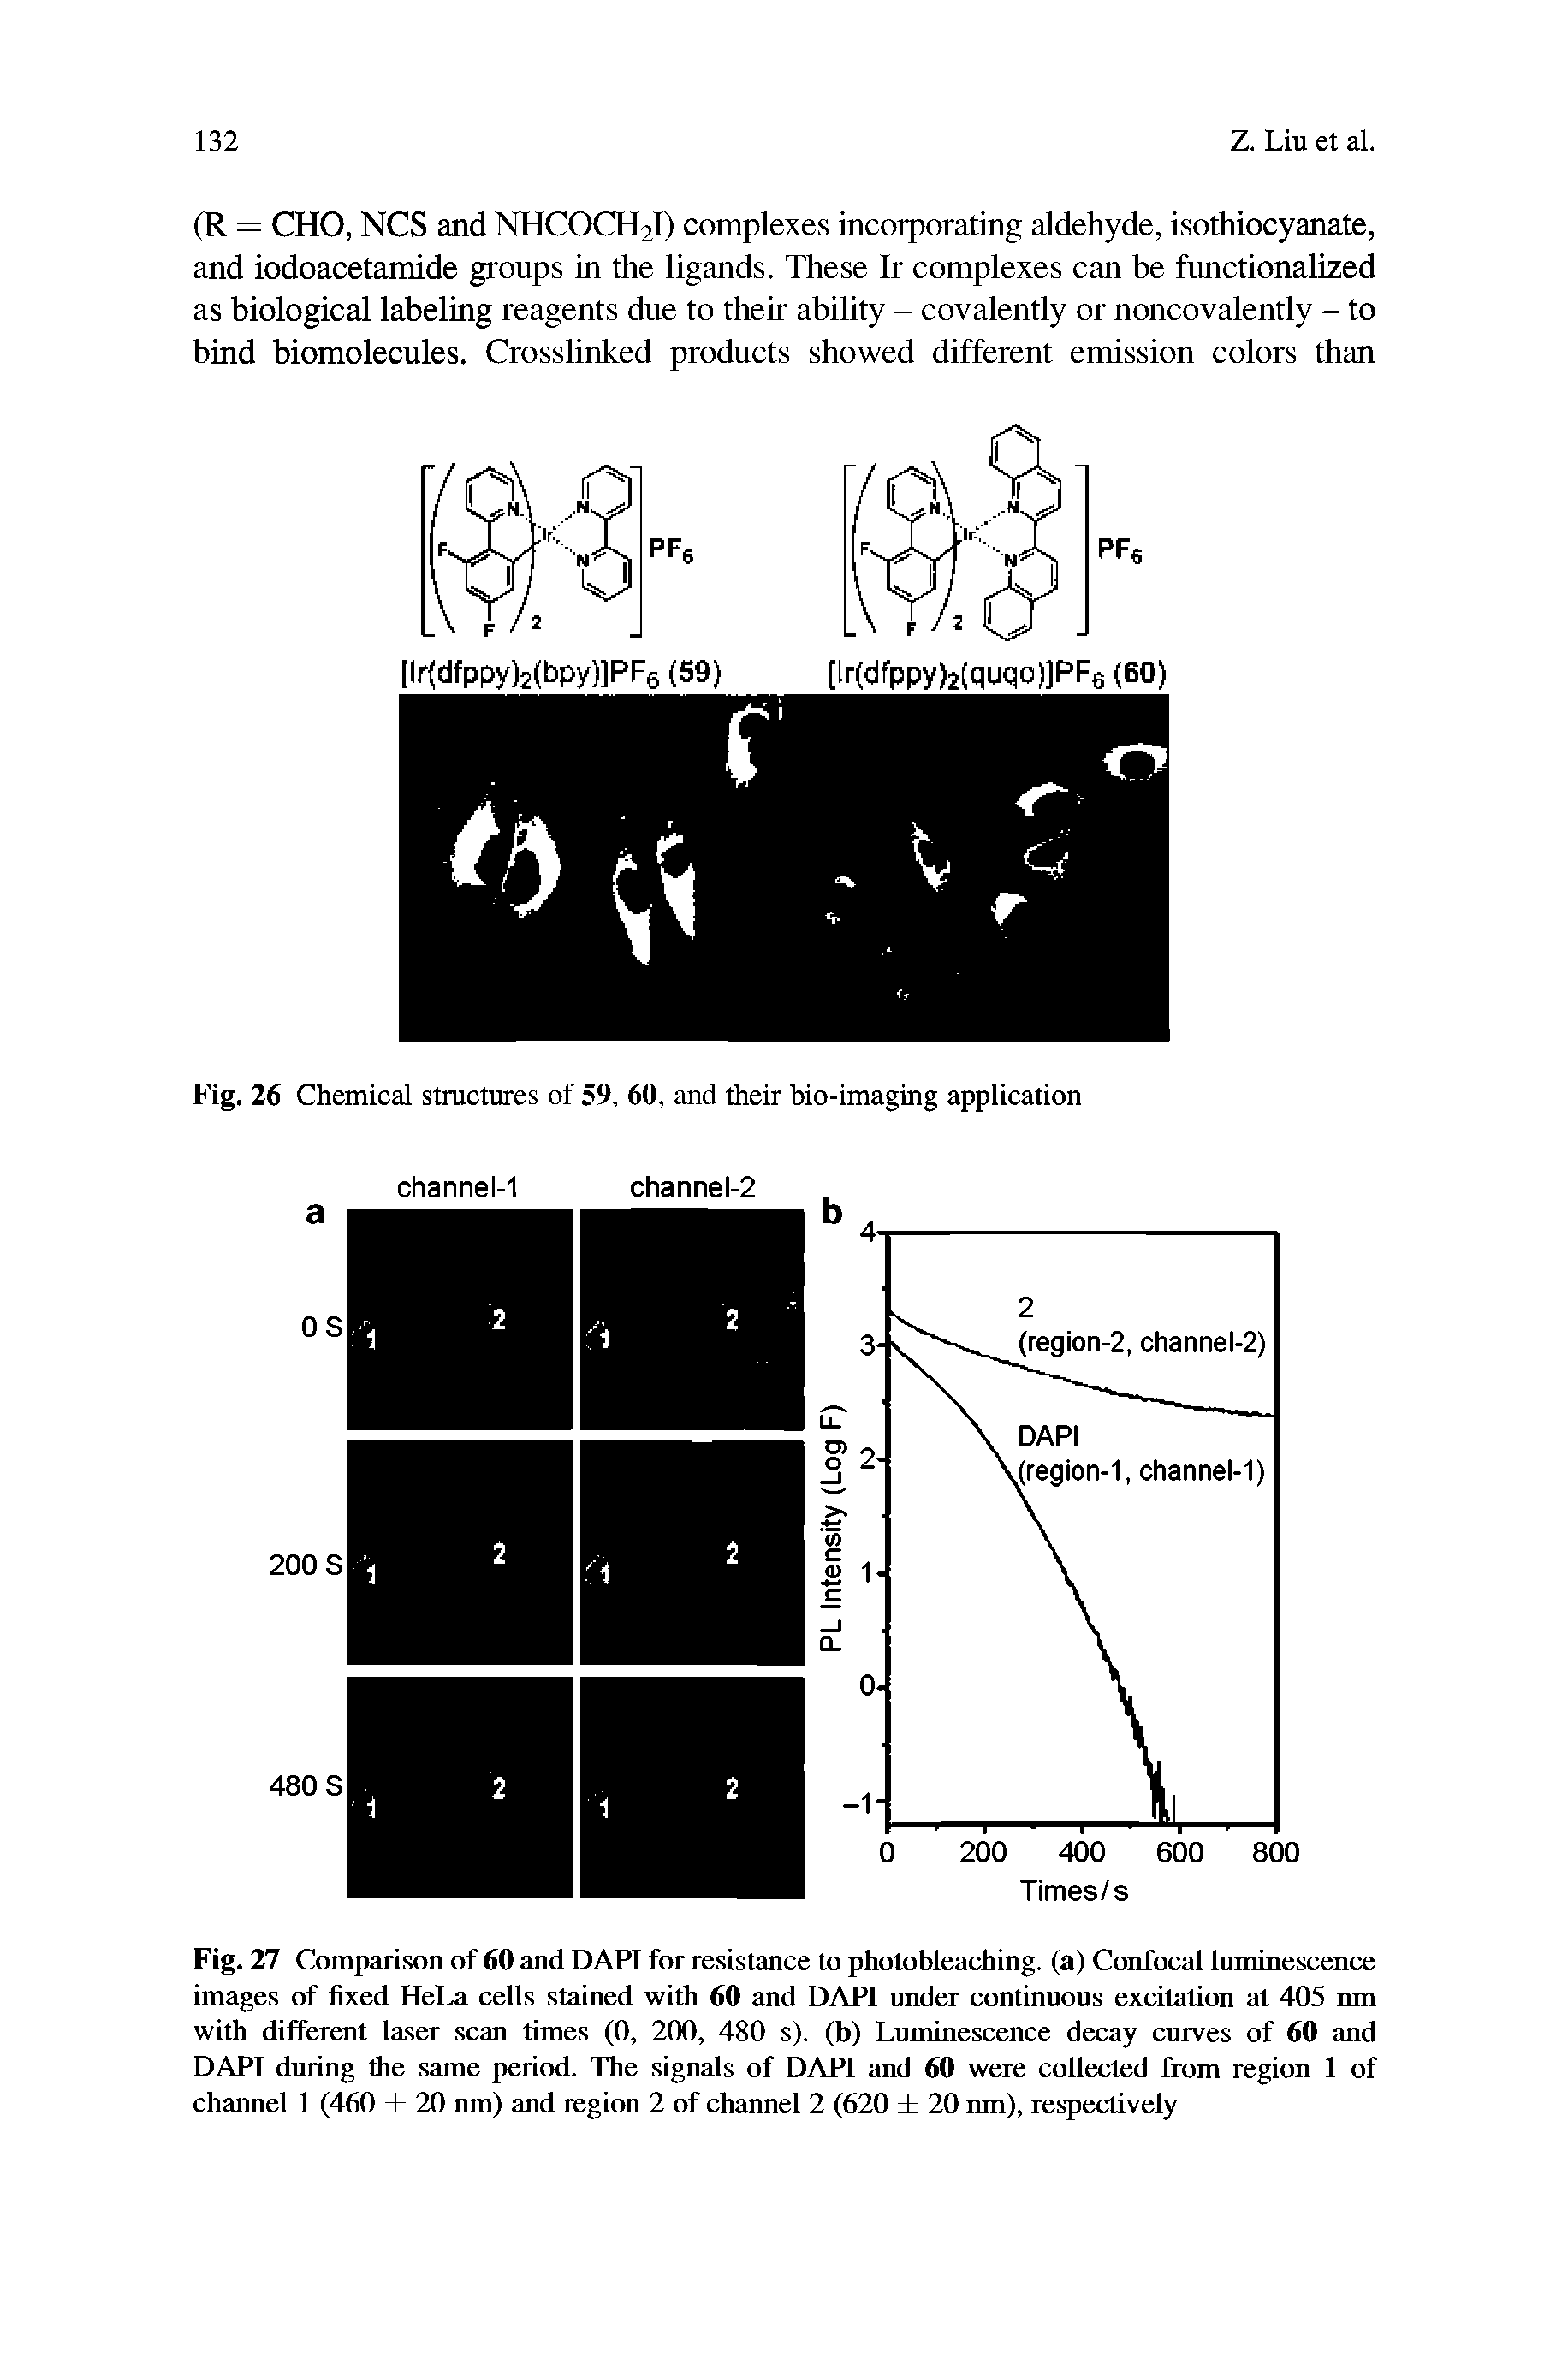 Fig. 27 Comparison of 60 and DAPI for resistance to photobleaching. (a) Confocal luminescence images of fixed HeLa cells stained with 60 and DAPI under continuous excitation at 405 nm with different laser scan times (0, 200, 480 s). (b) Luminescence decay curves of 60 and DAPI during the same period. The signals of DAPI and 60 were collected from region 1 of channel 1 (460 20 nm) and region 2 of channel 2 (620 20 nm), respectively...